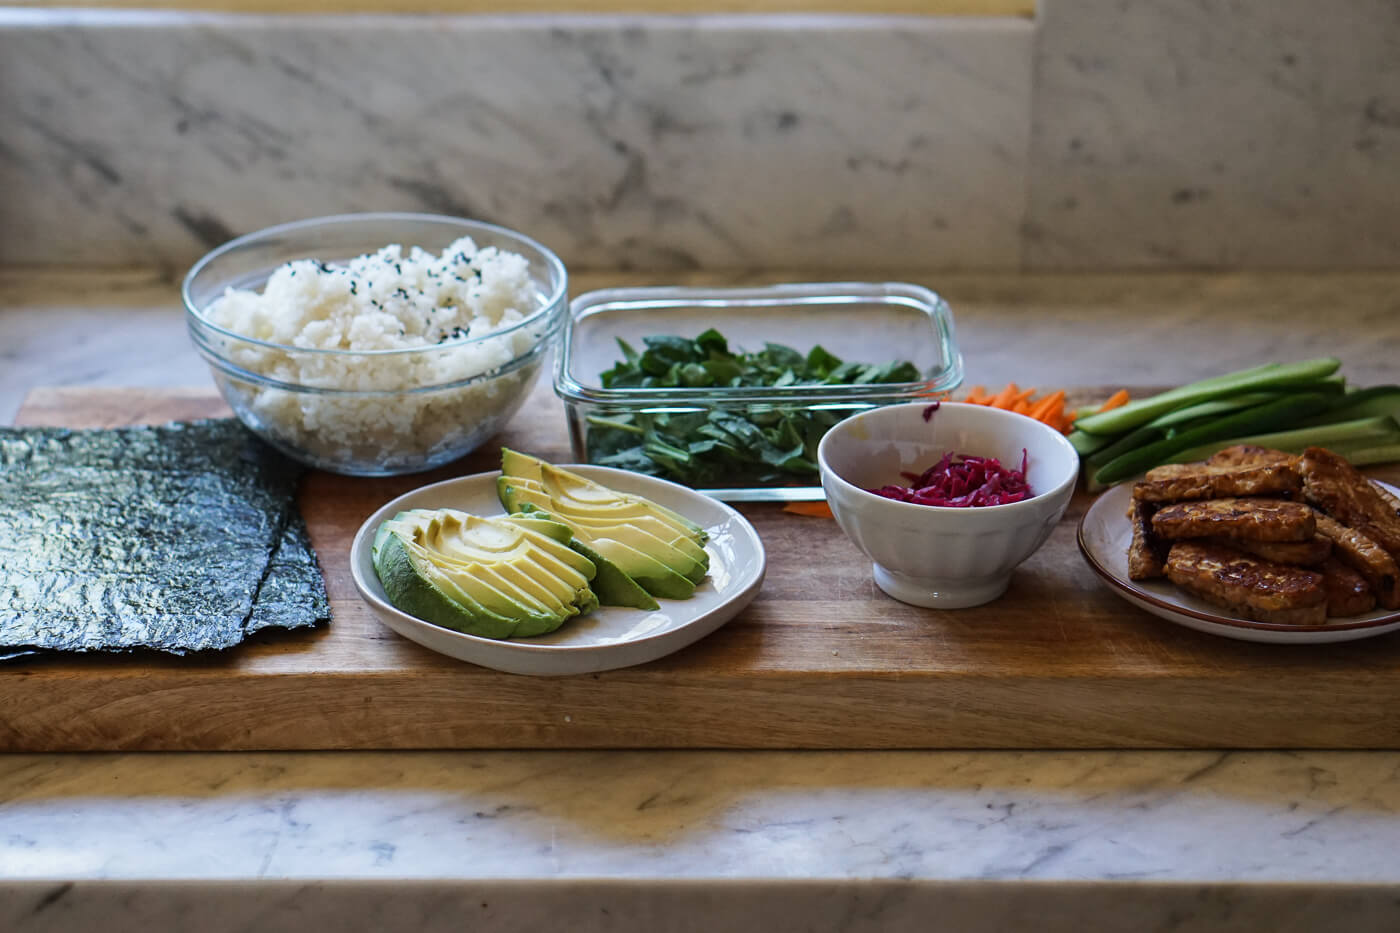 The ingredients for sushi burritos set on a cutting board.